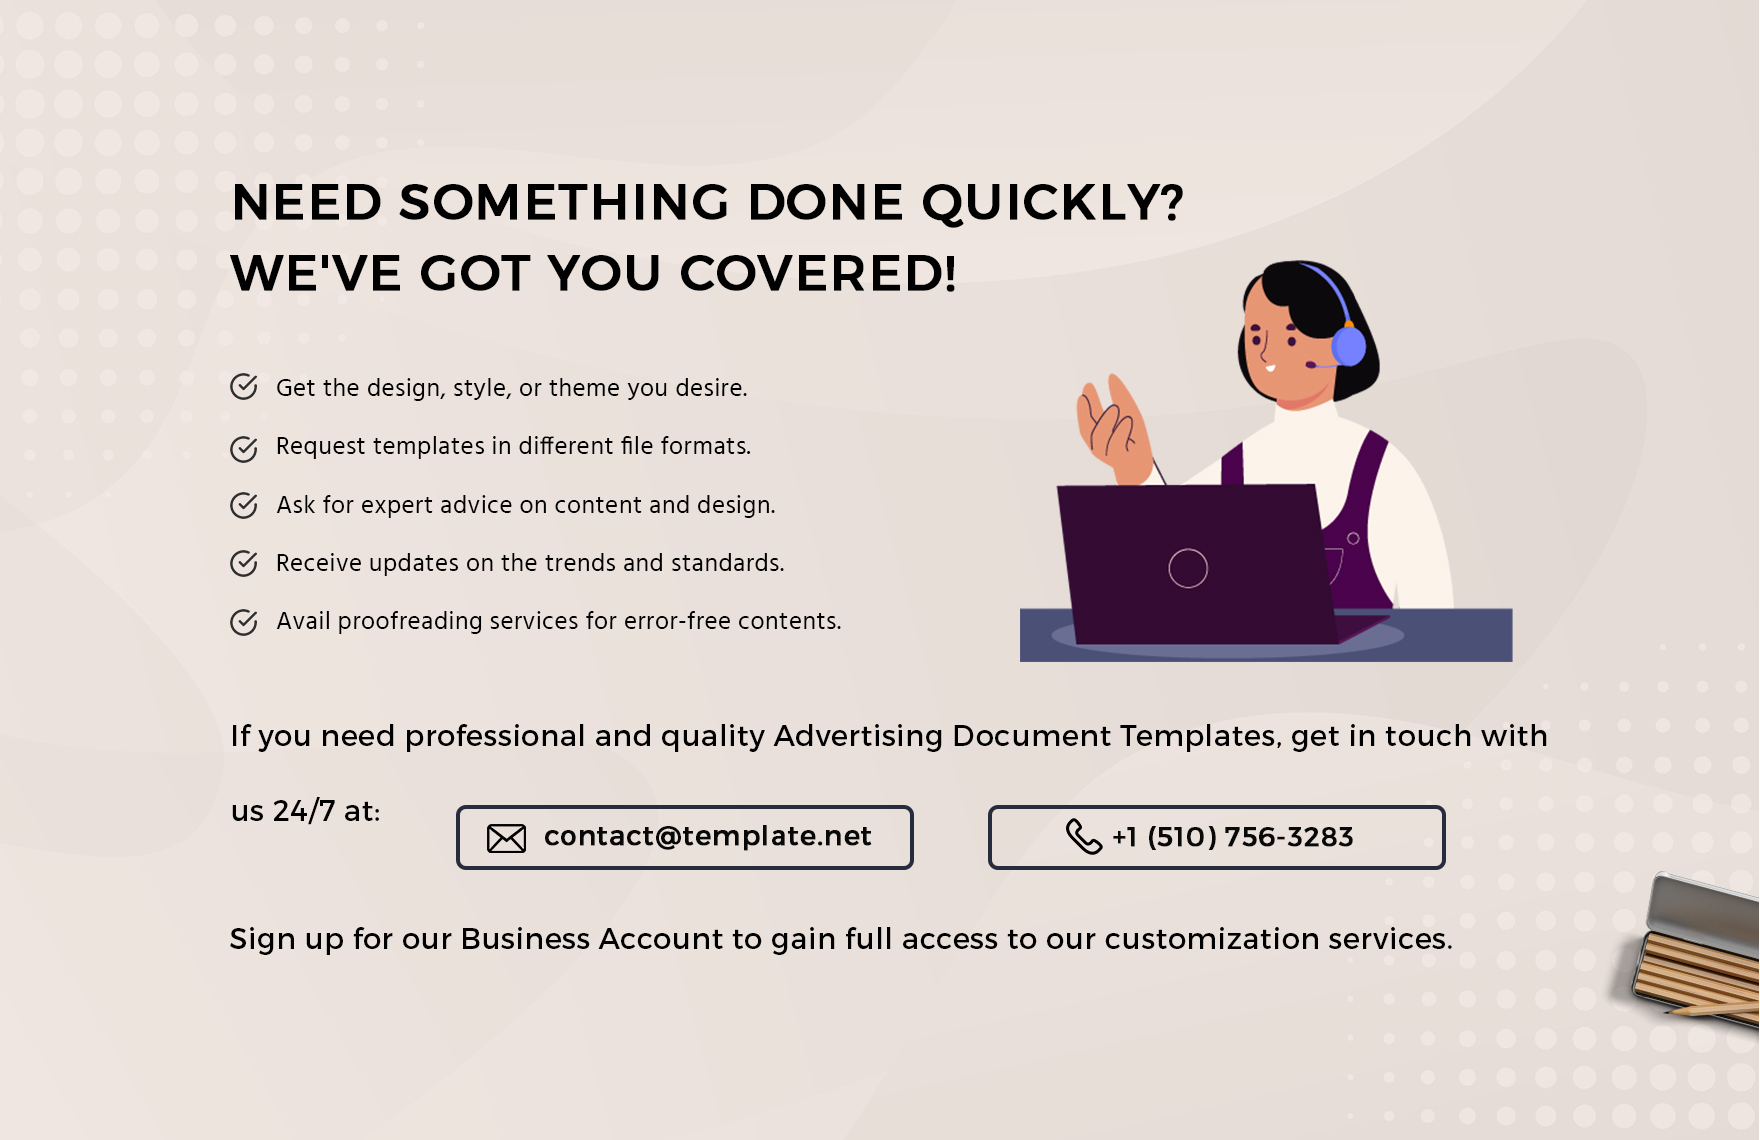 Advertising Campaign Minutes Template